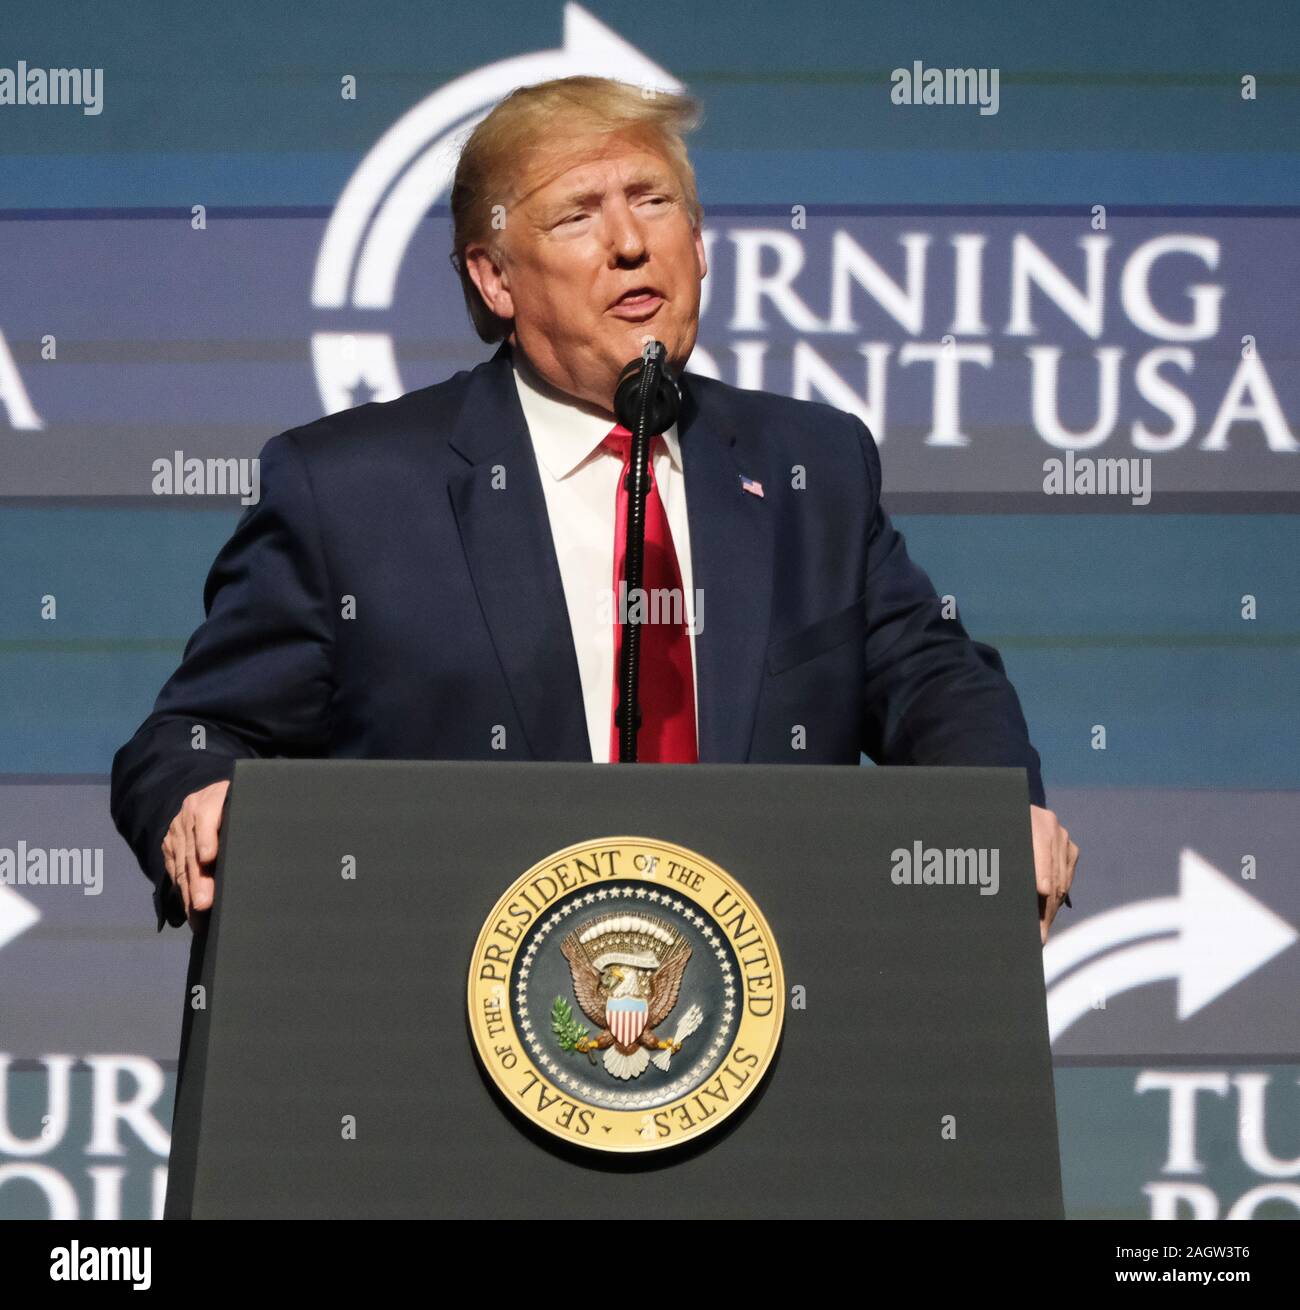 West Palm Beach, USA. 21st Dec, 2019. USA President Donald J.Trump speaks at the Turning Point USA conference for young conservatives at the Palm Beach Convention Center in West Palm Beach, Florida on Saturday, December 21, 2019. On Wednesday, December 18, 2019, President Donald Trump was the third U.S. President to be impeached by the House of Representatives. Photo by Gary I Rothstein/UPI Credit: UPI/Alamy Live News Stock Photo